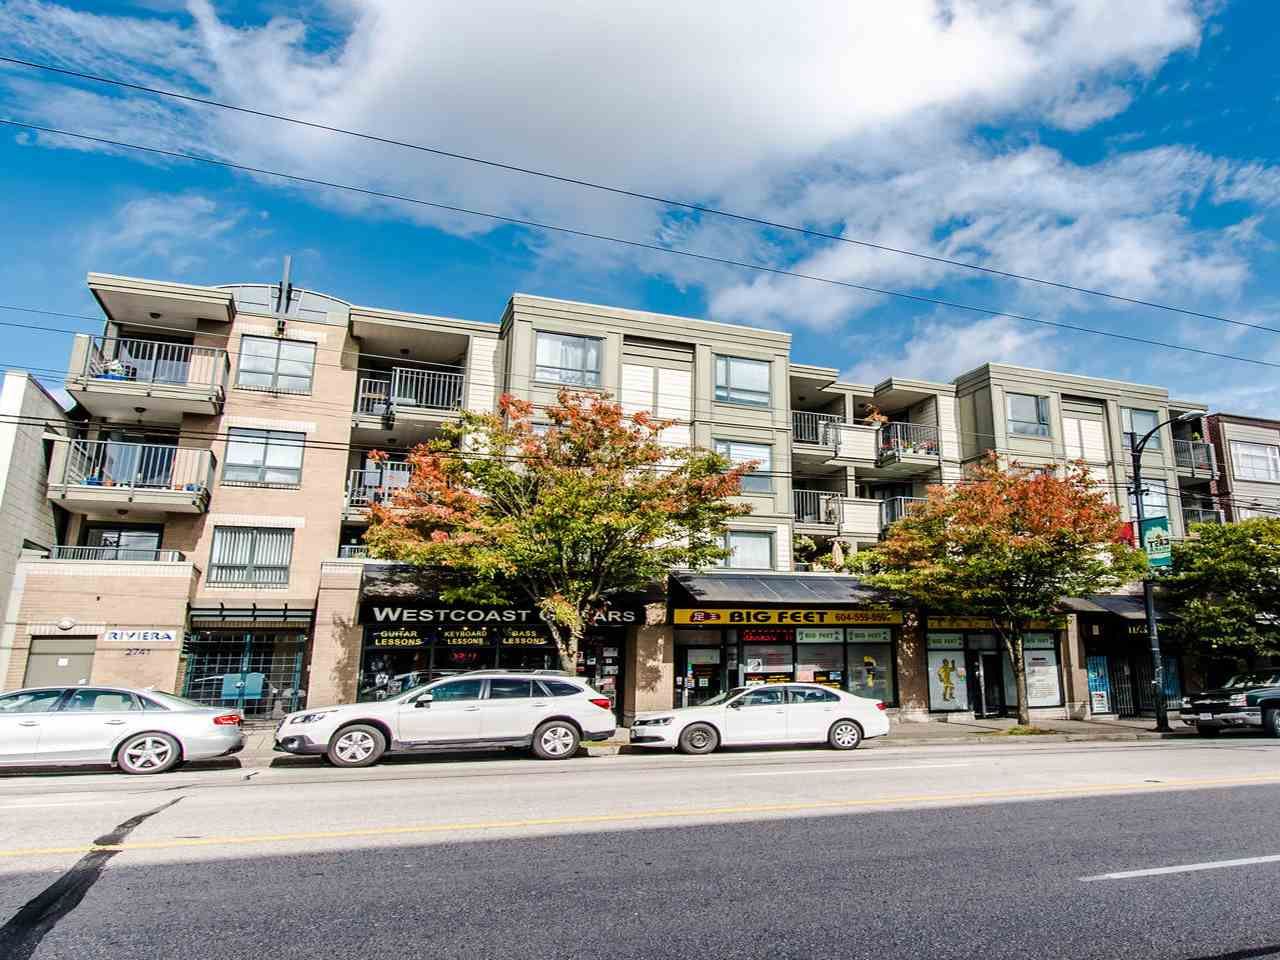 Main Photo: 103 2741 E HASTINGS STREET in Vancouver: Hastings Sunrise Condo for sale (Vancouver East)  : MLS®# R2538941